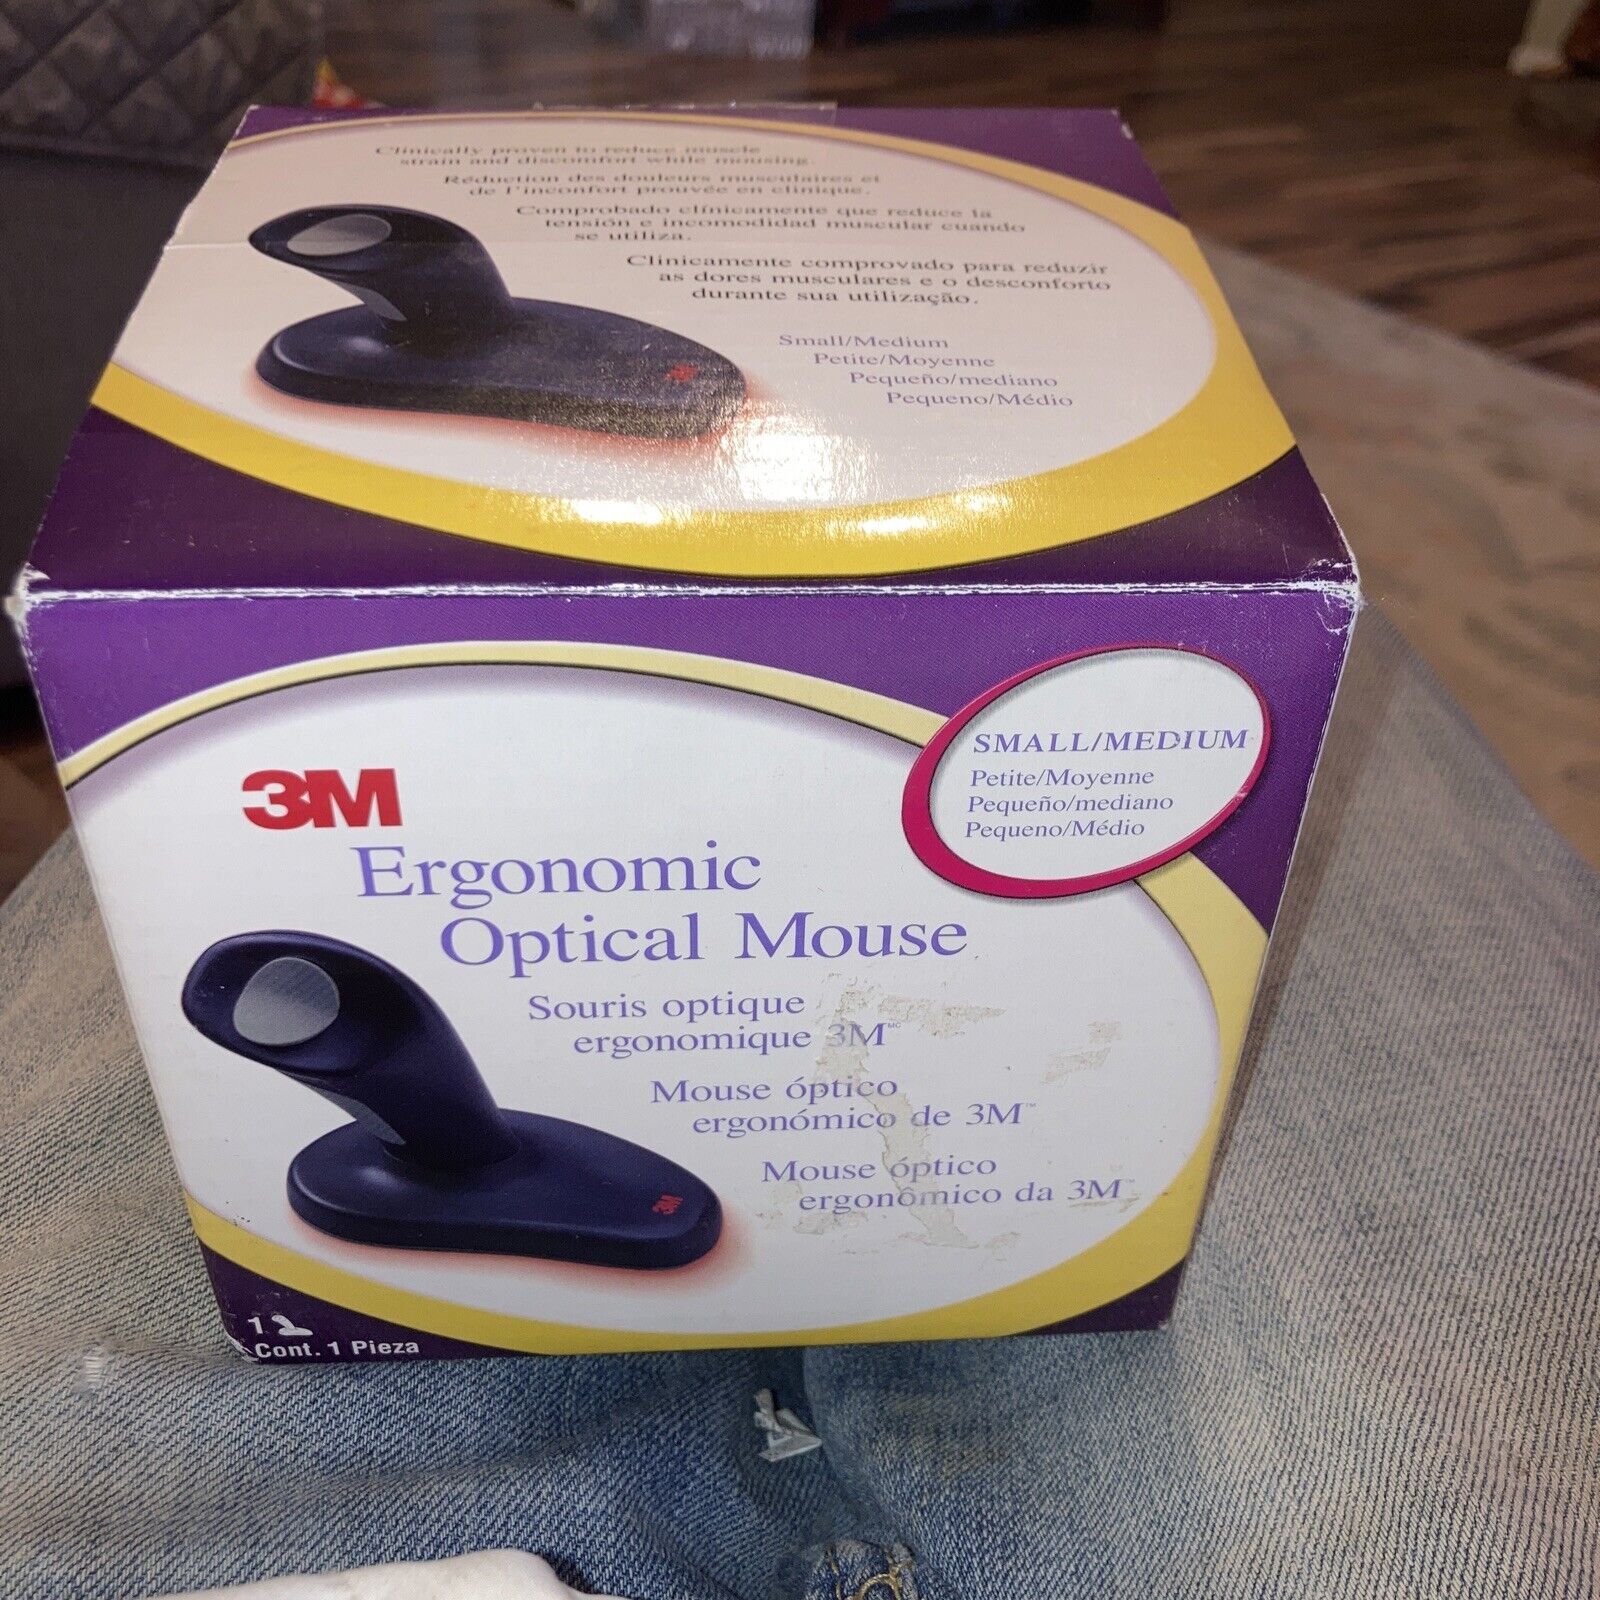 3M Ergonomic Mouse, EM500GPS-AM, Small/Medium Wired Mouse